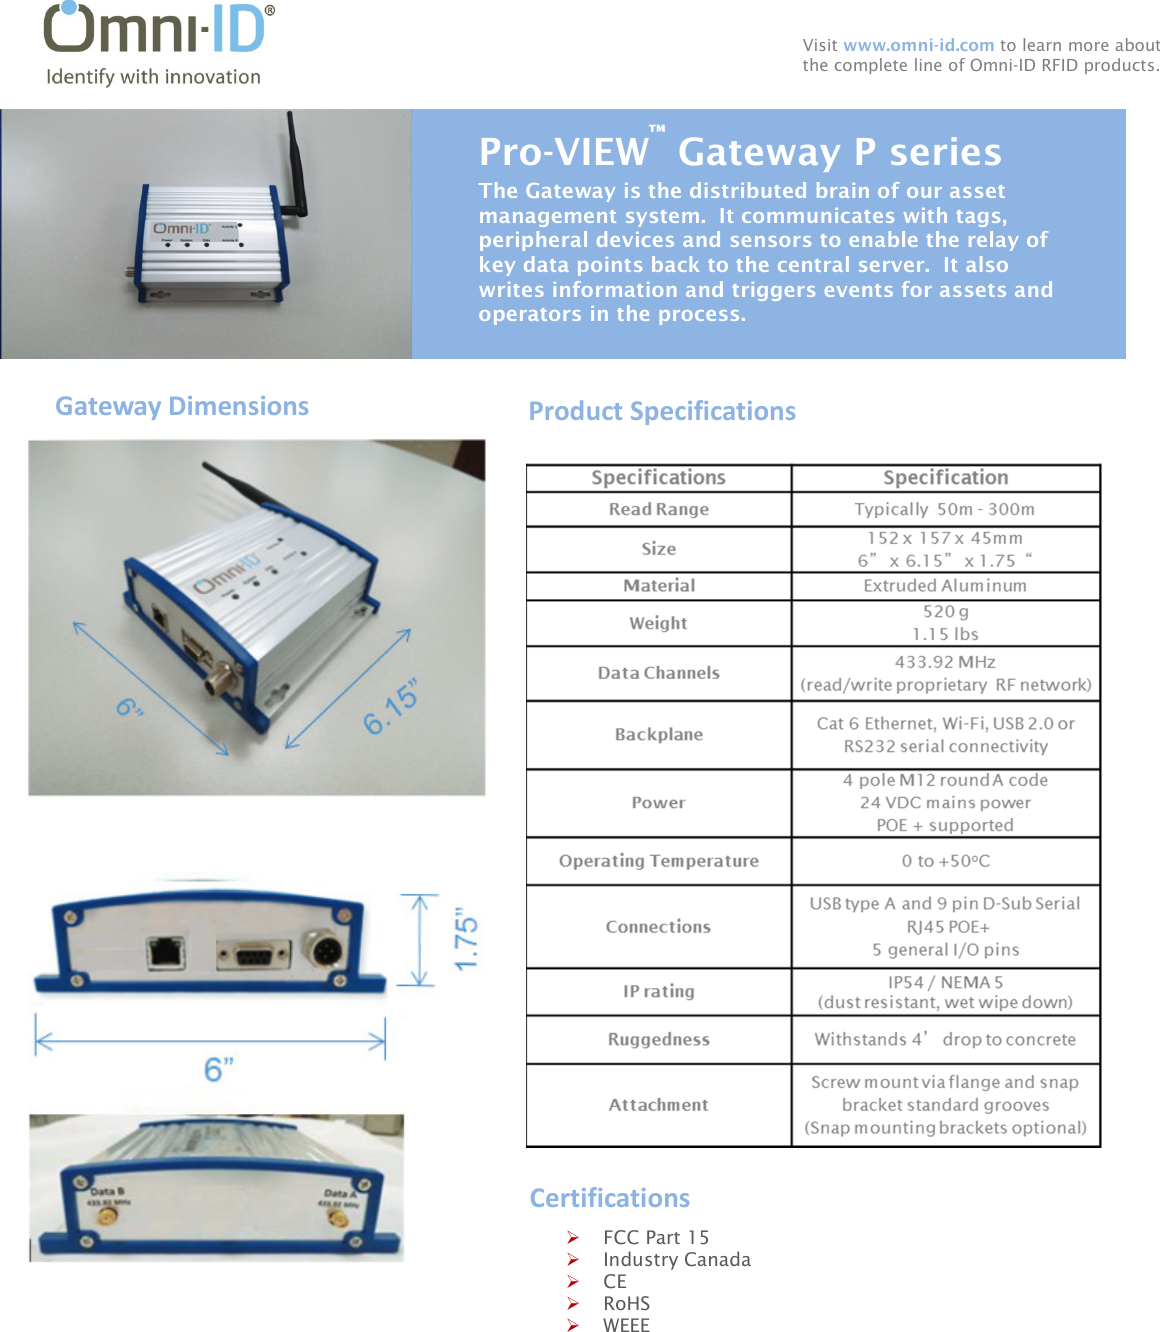  Visit www.omni-id.com to learn more about the complete line of Omni-ID RFID products. Pro-VIEW™ Gateway P series Product Specifications Gateway Dimensions           The Gateway is the distributed brain of our asset management system.  It communicates with tags, peripheral devices and sensors to enable the relay of key data points back to the central server.  It also writes information and triggers events for assets and operators in the process.   FCC Part 15  Industry Canada  CE  RoHS  WEEE Certifications 